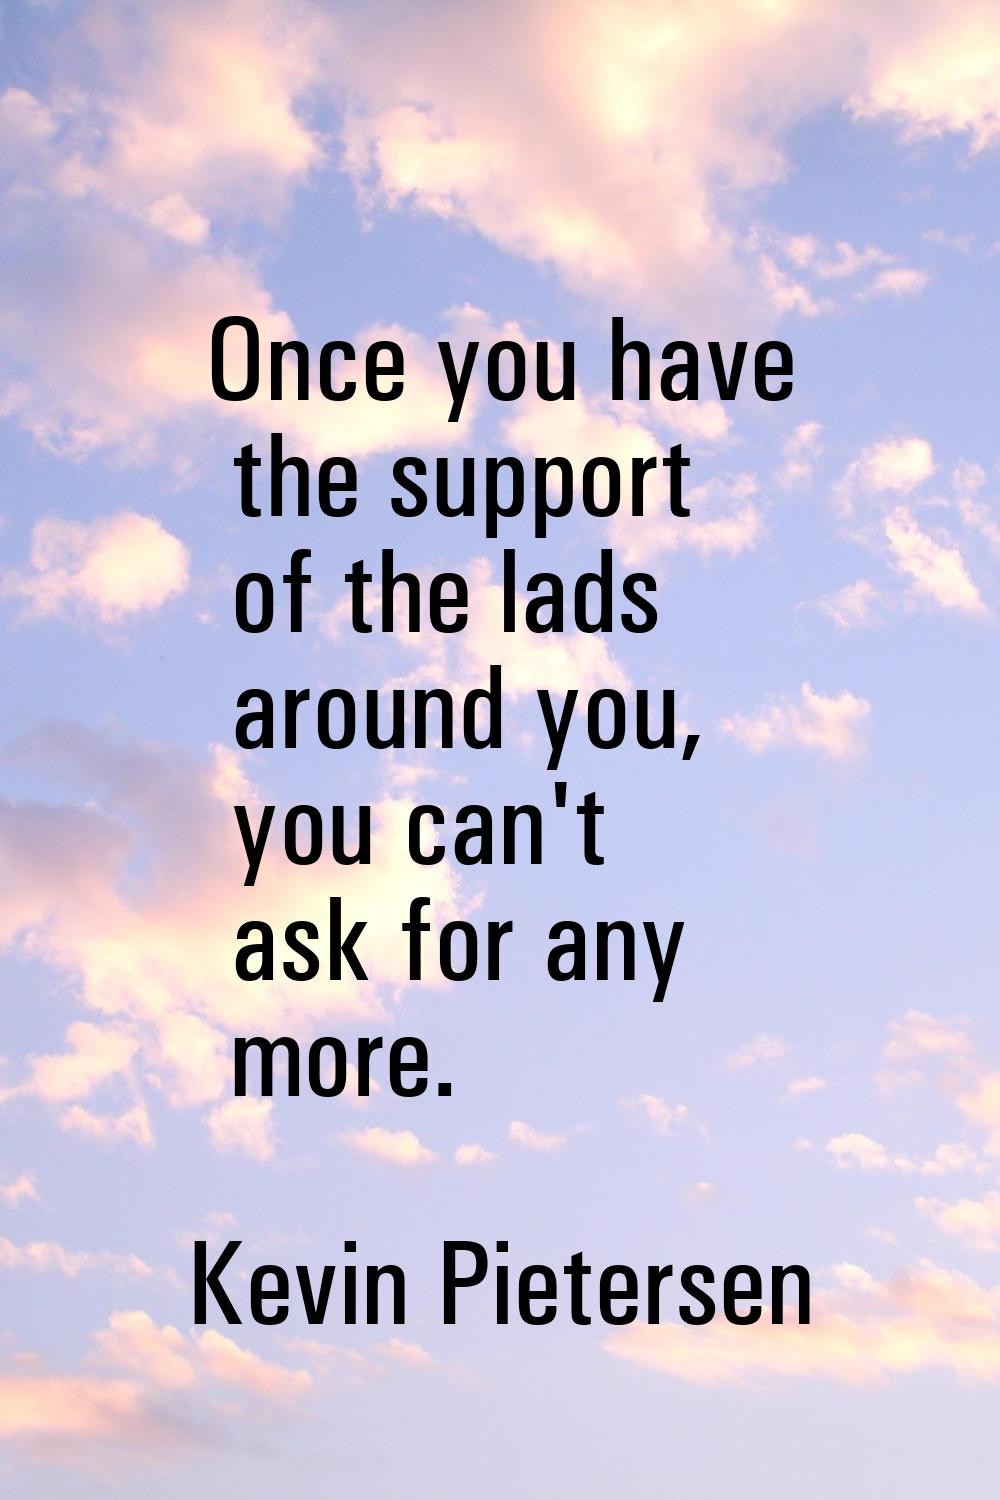 Once you have the support of the lads around you, you can't ask for any more.